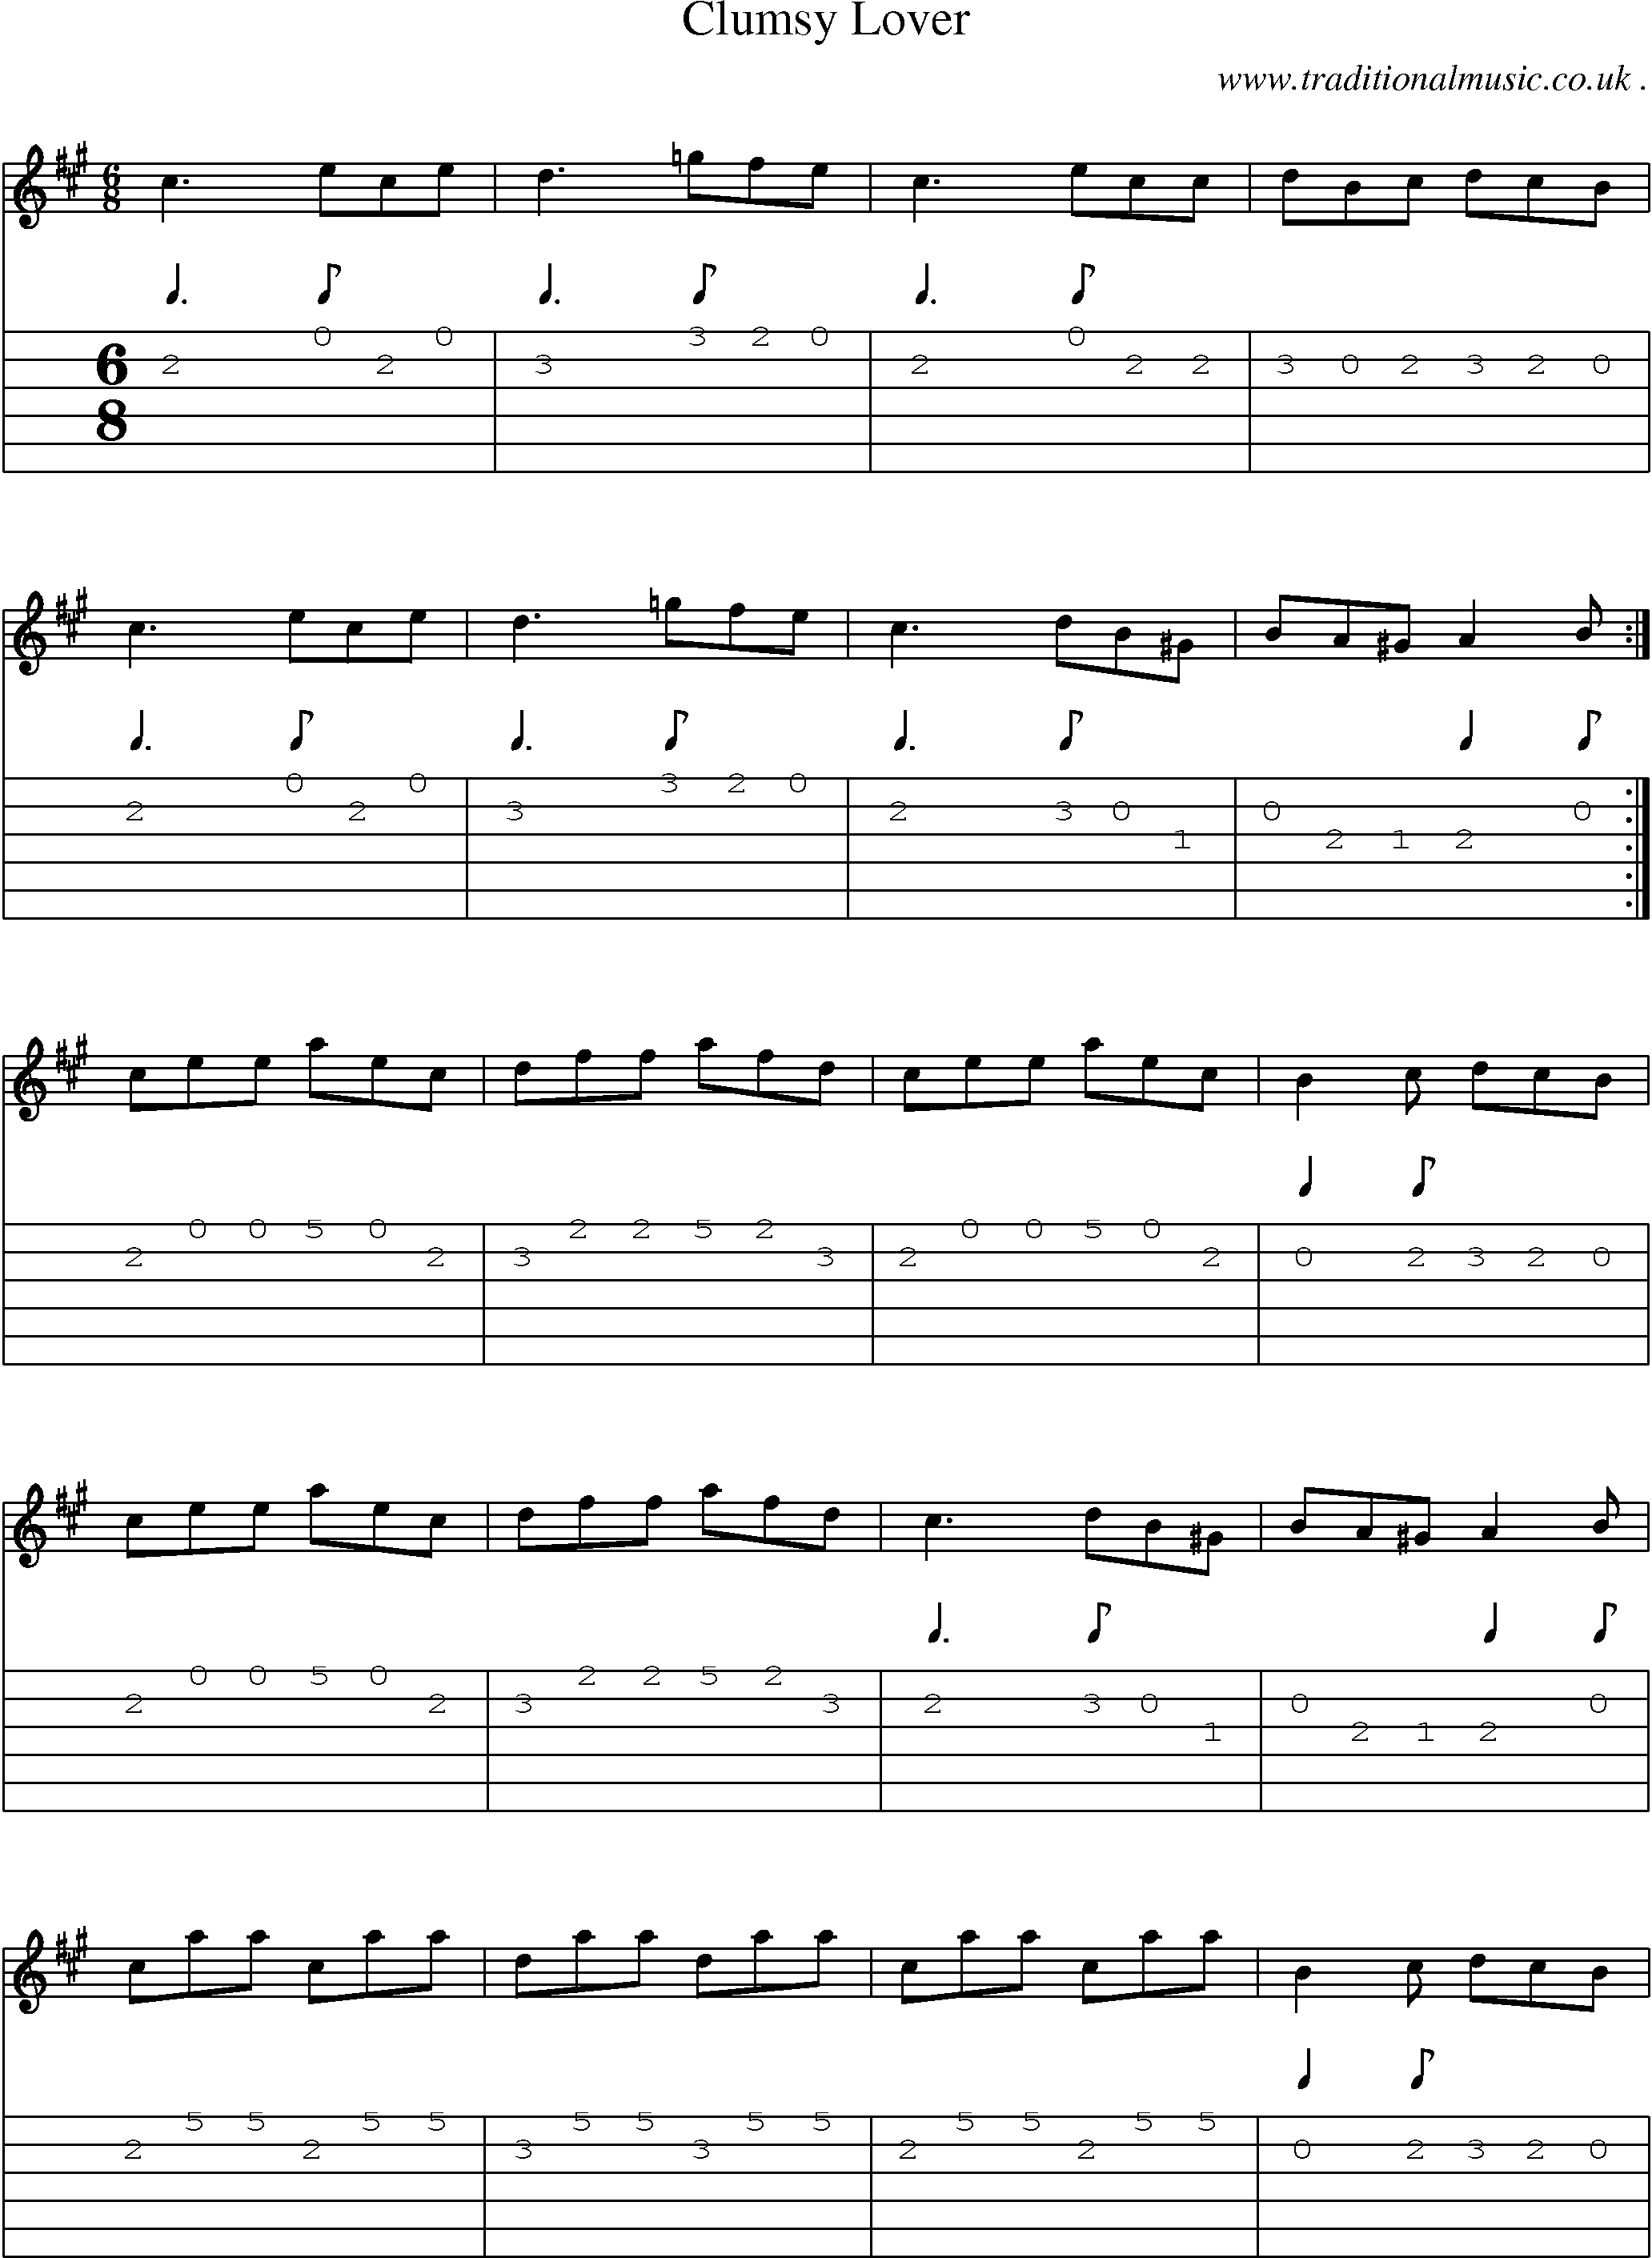 Sheet-Music and Guitar Tabs for Clumsy Lover